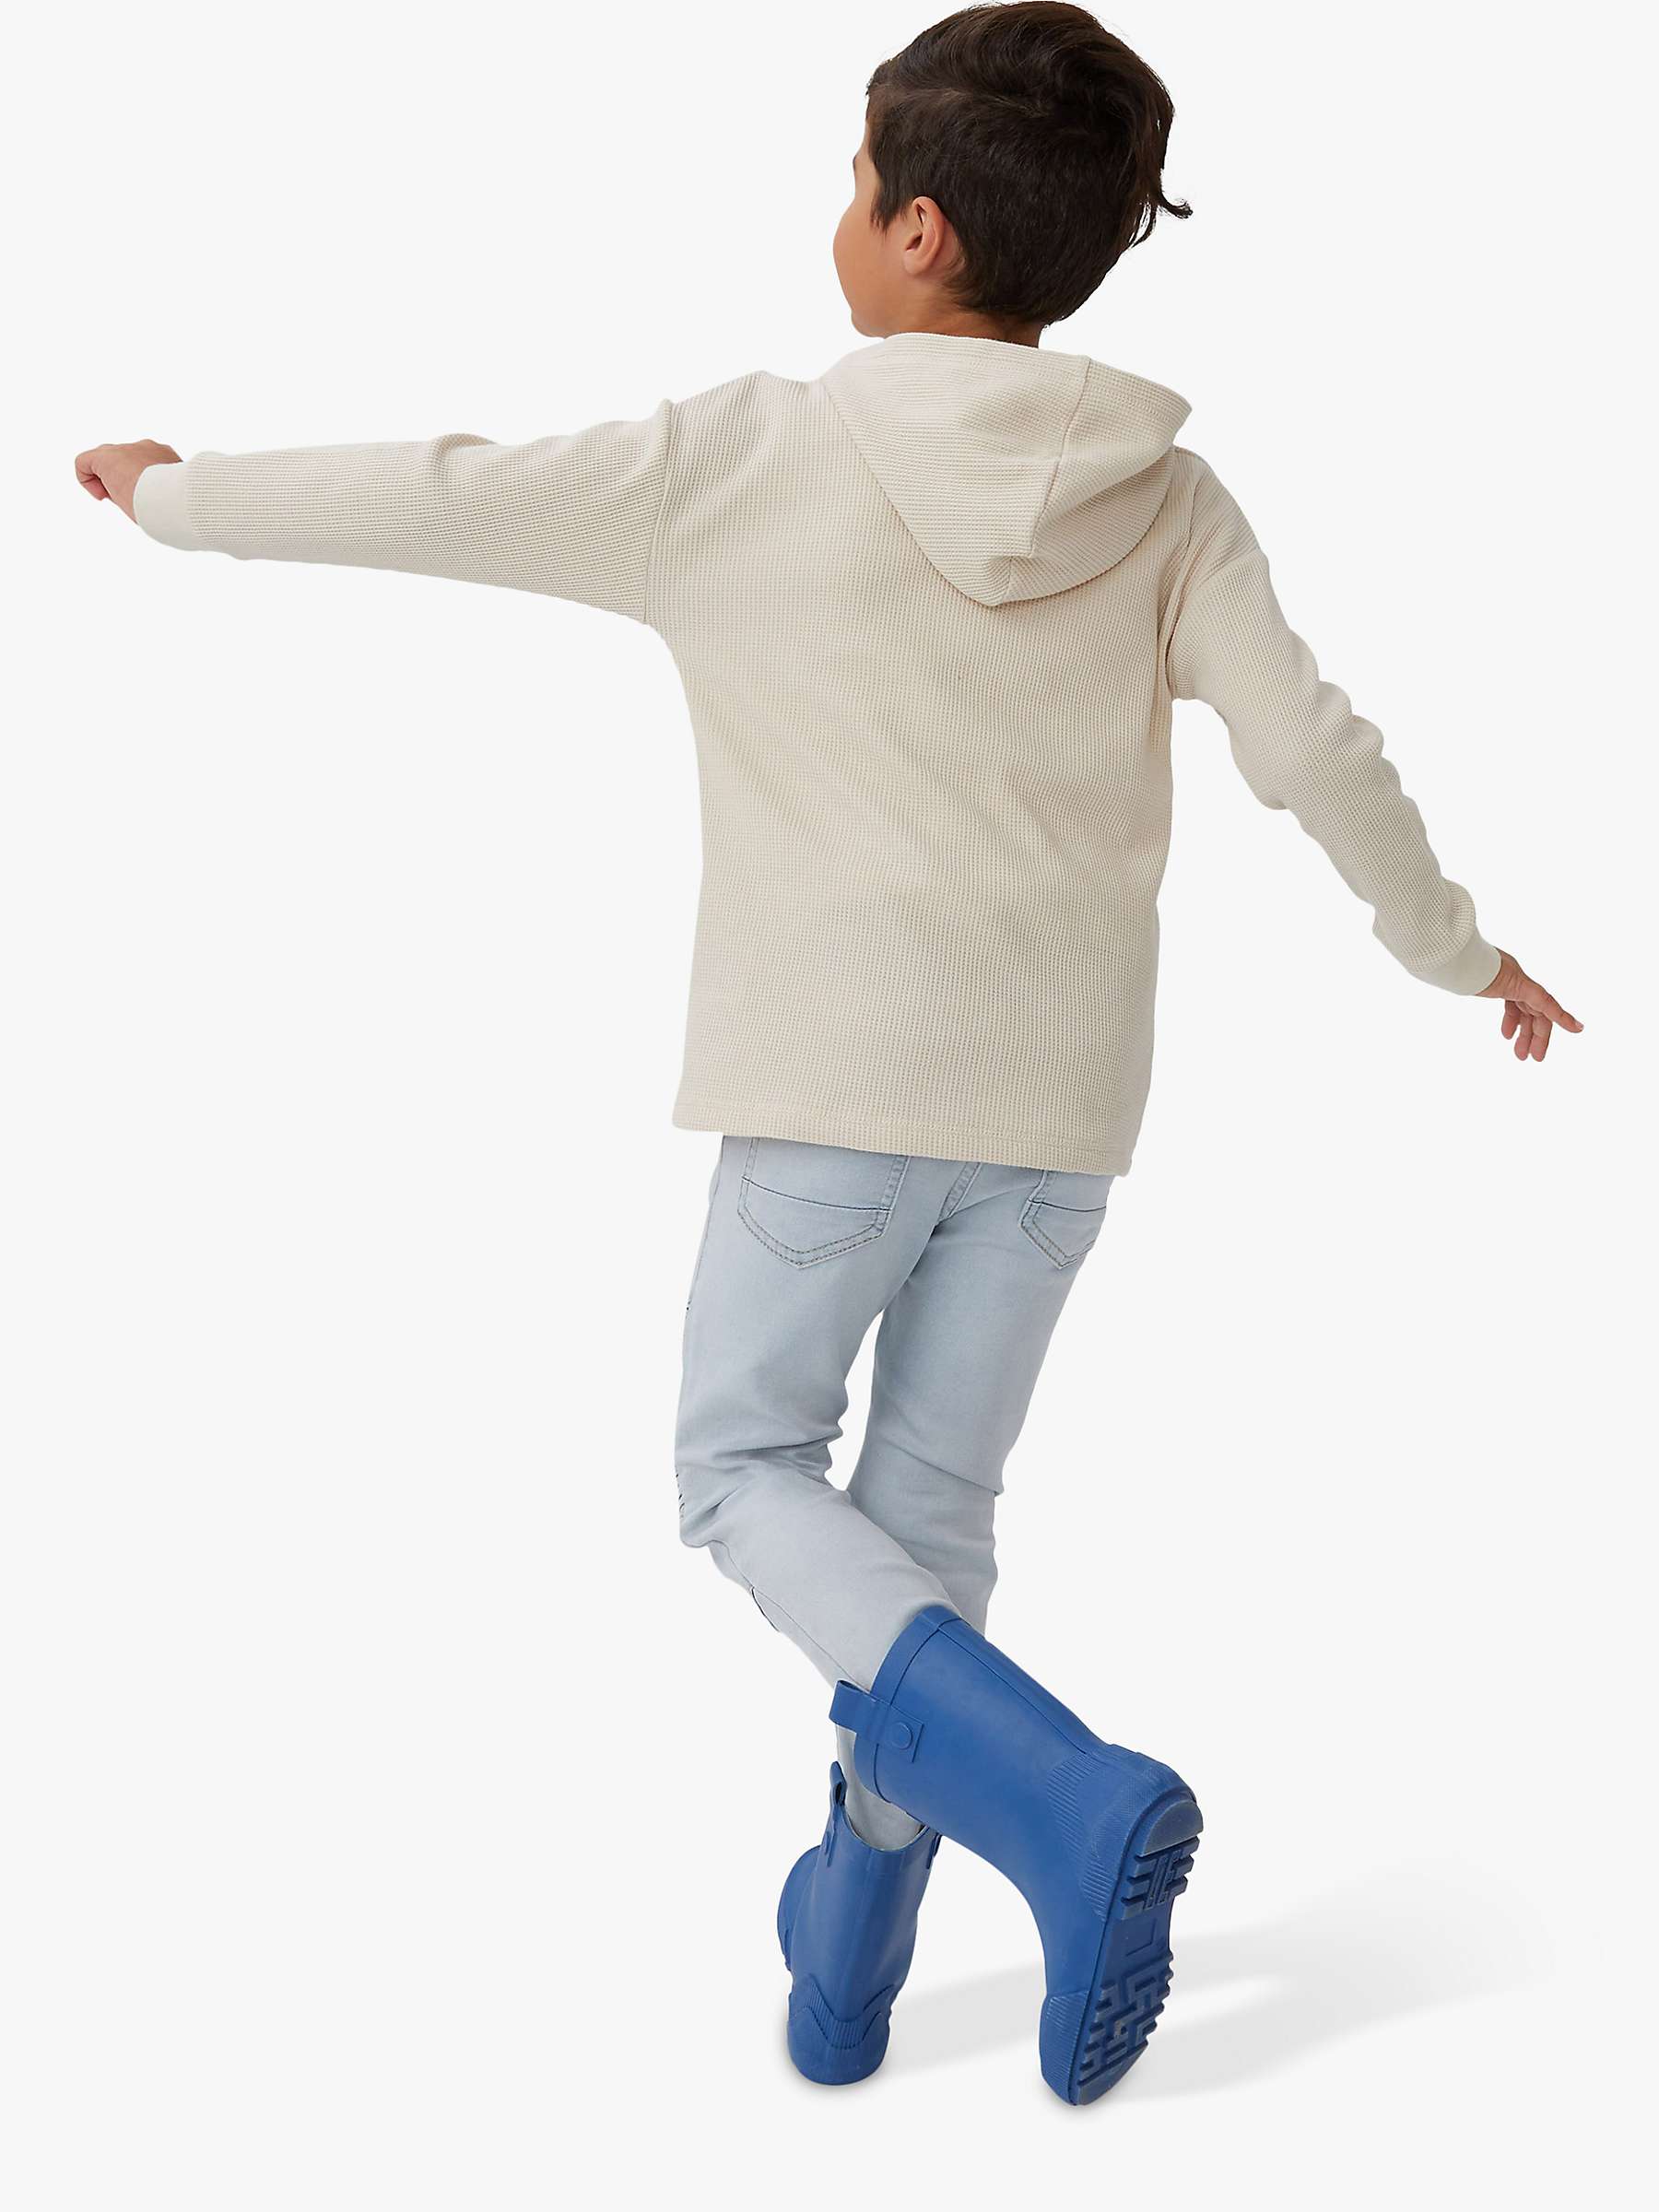 Buy Cotton On Kids' Waffle Knit Hoodie Online at johnlewis.com